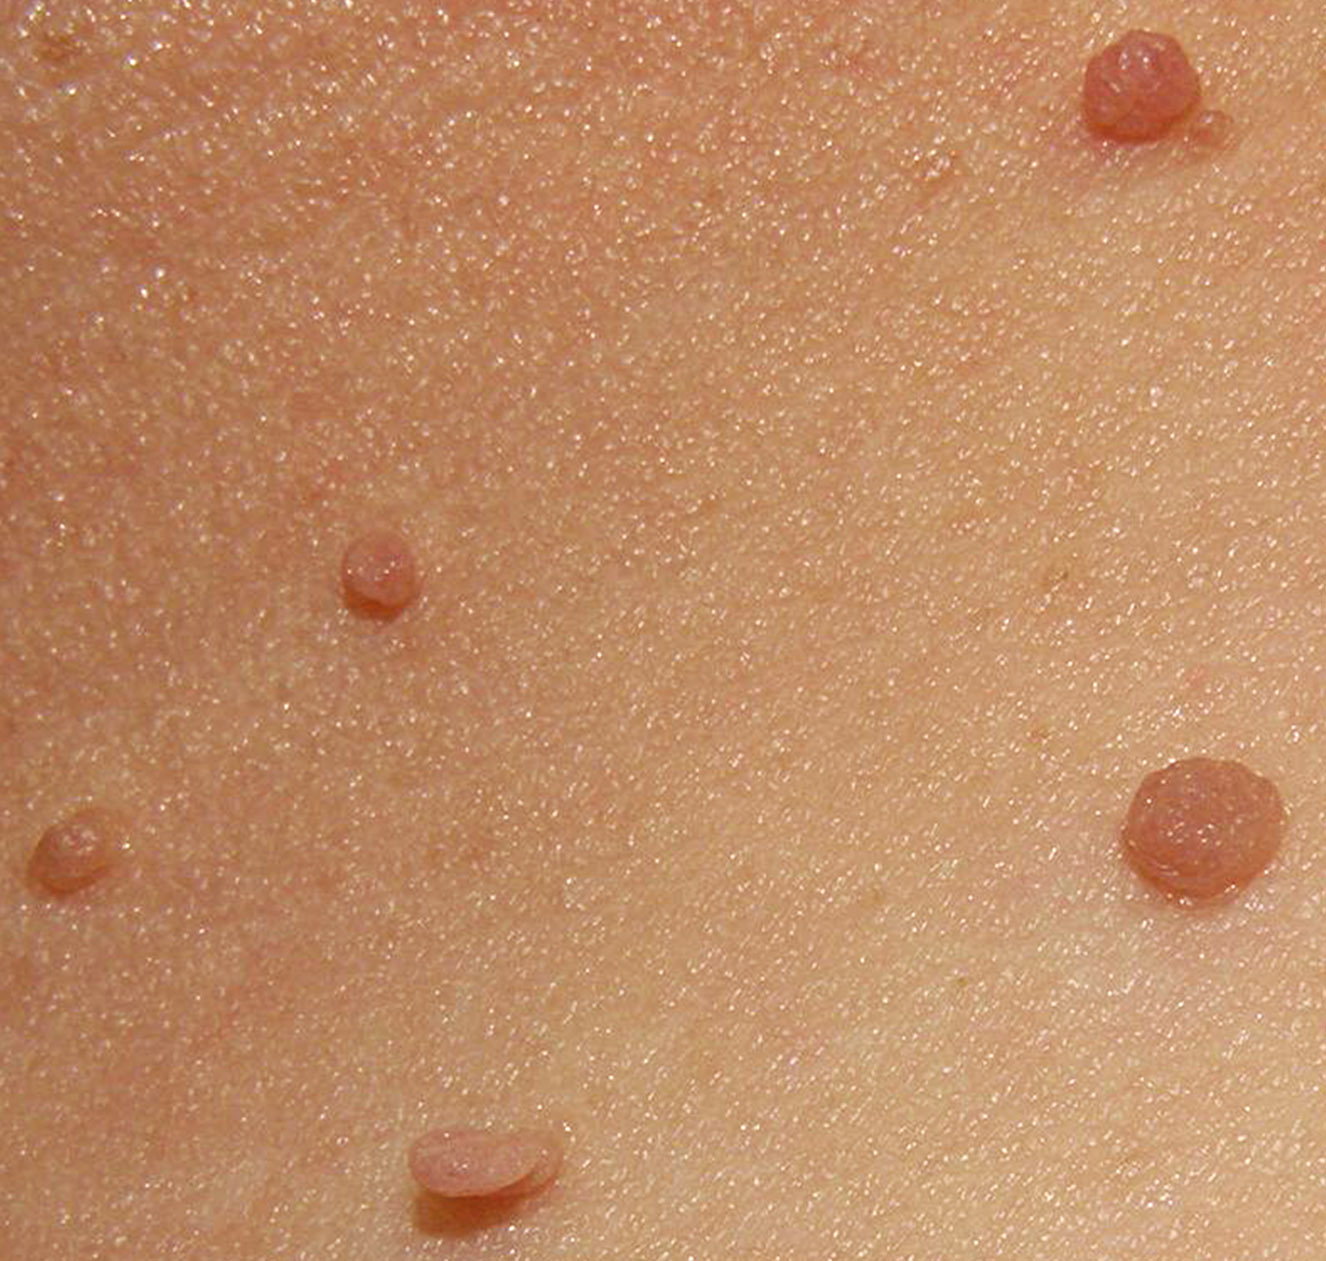 Difference Between Wart and Skin Tag